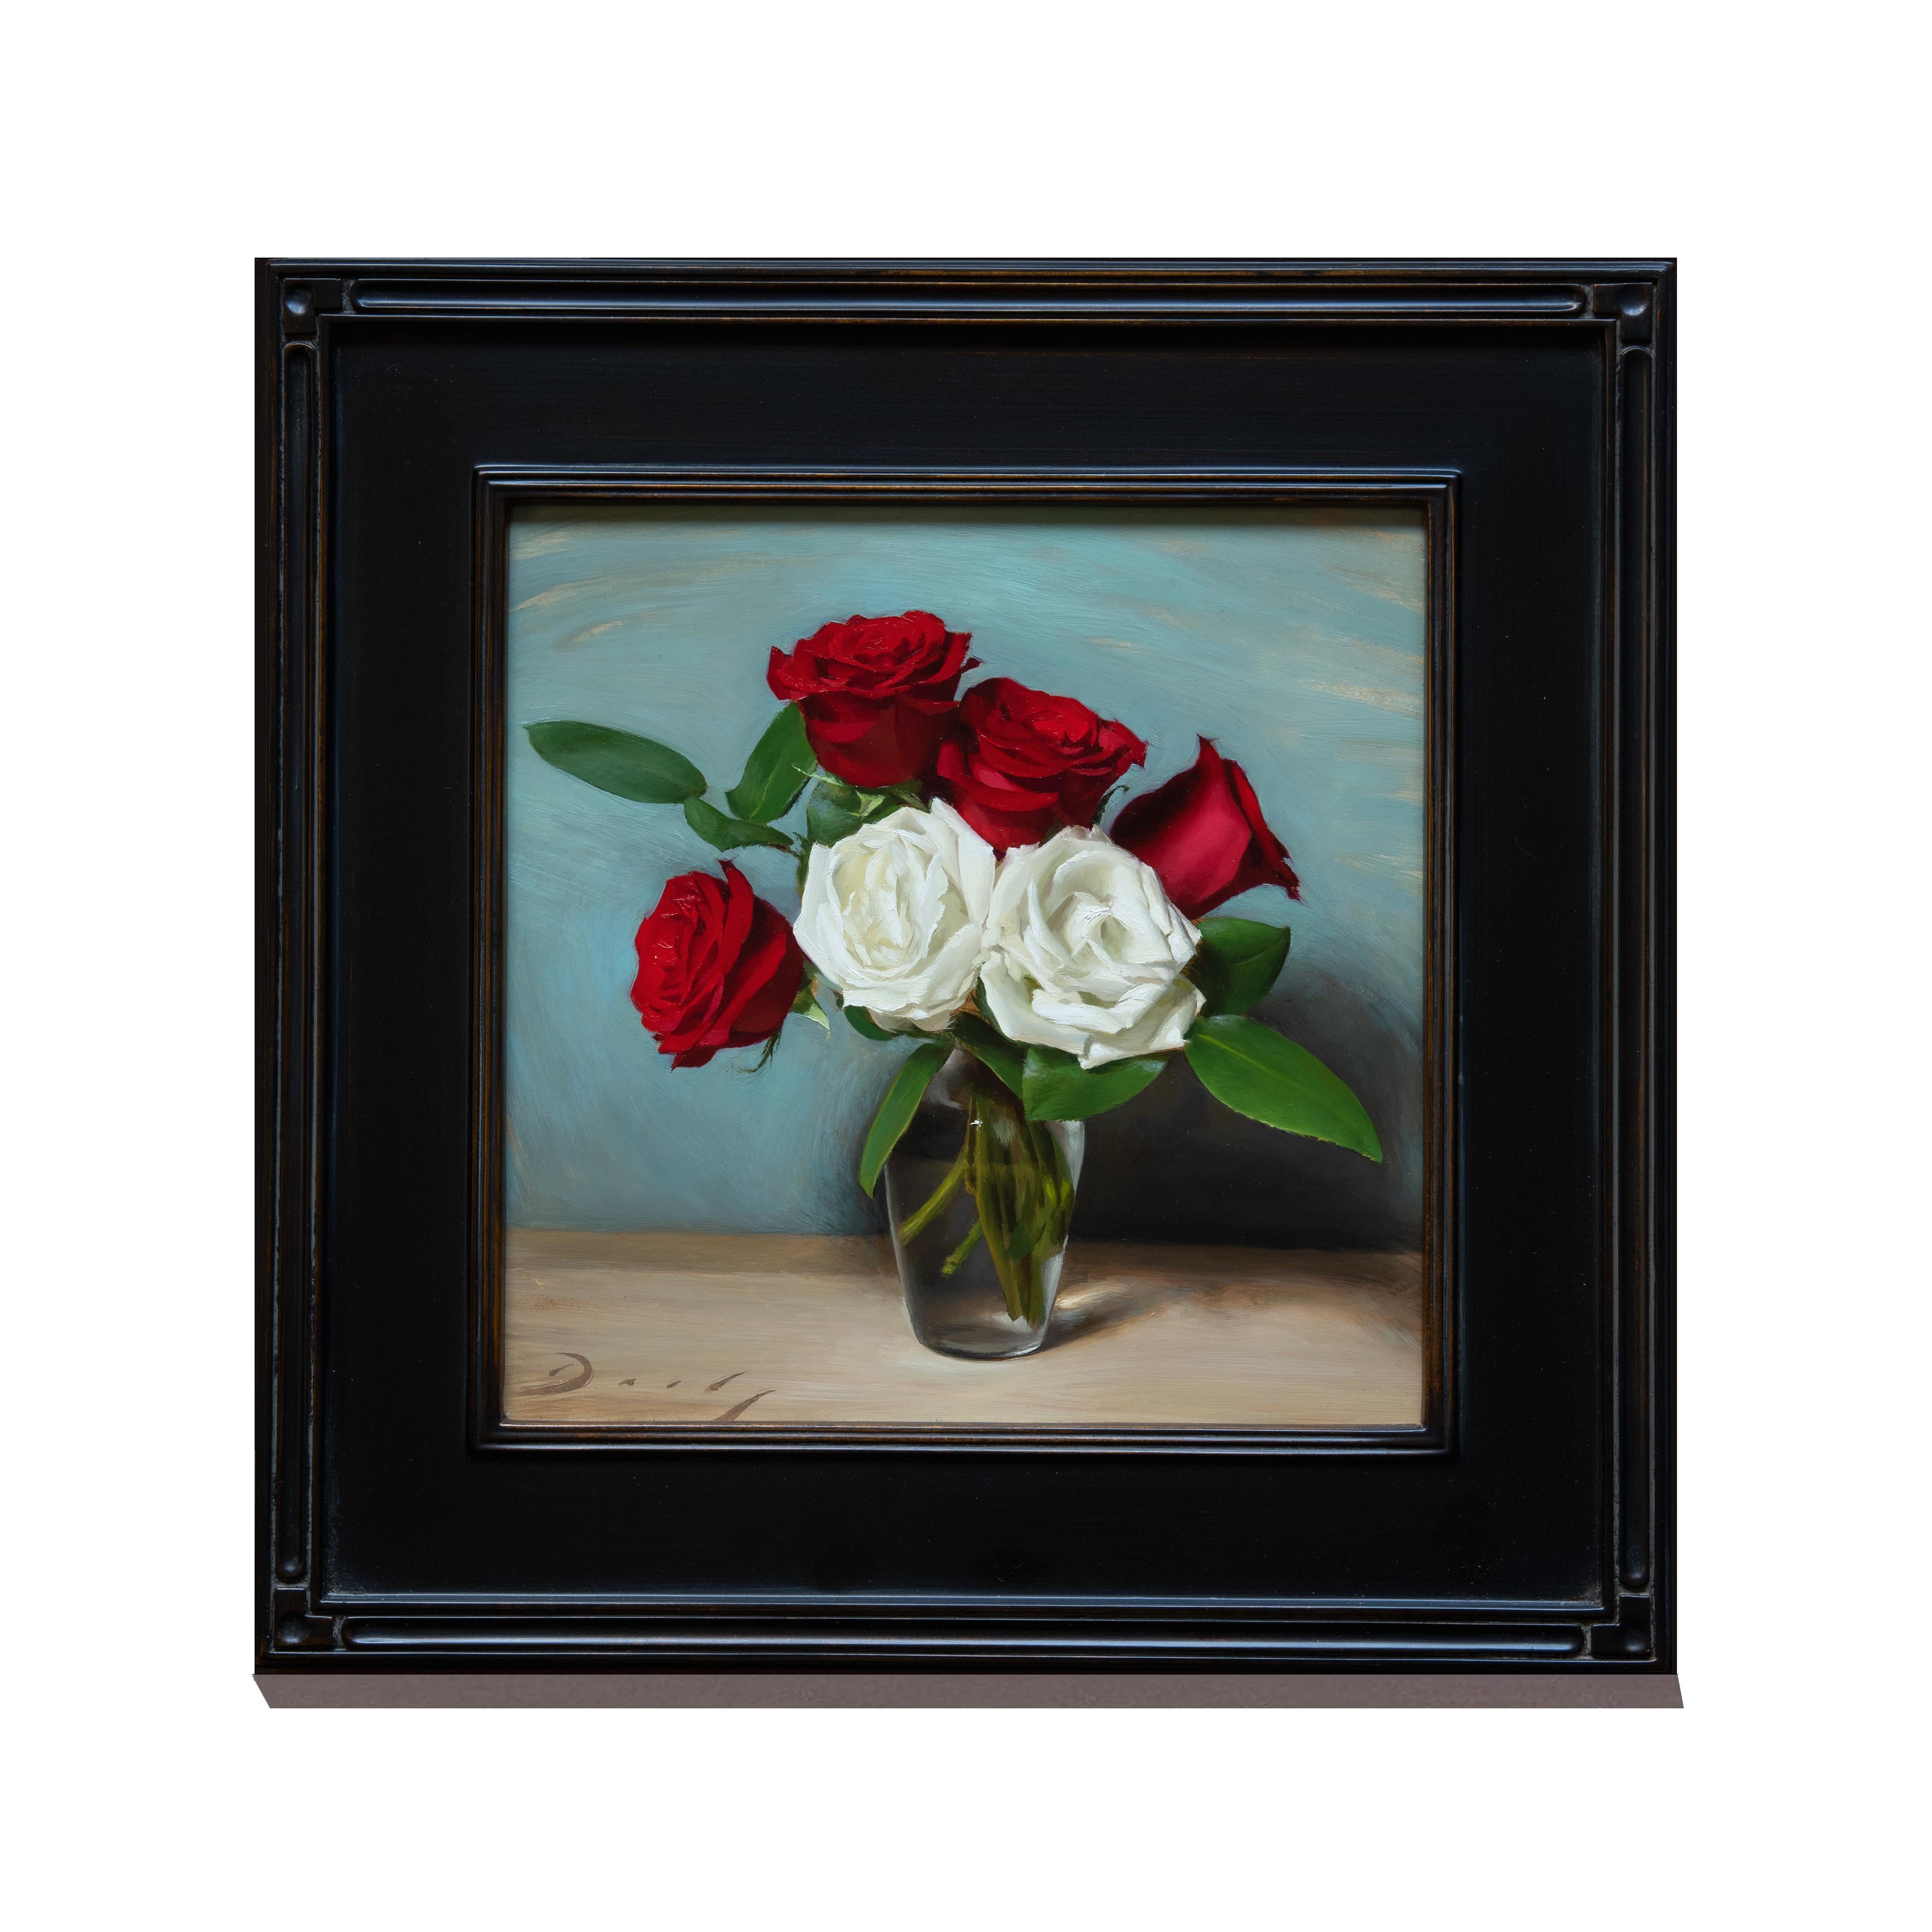 A bouquet of flowers made up of red and white roses set in a glass vase create a beautiful central composition in, Curtain Call. The painting’s cheerful light blue background is painted with action, revealing the tone of the under painting in areas